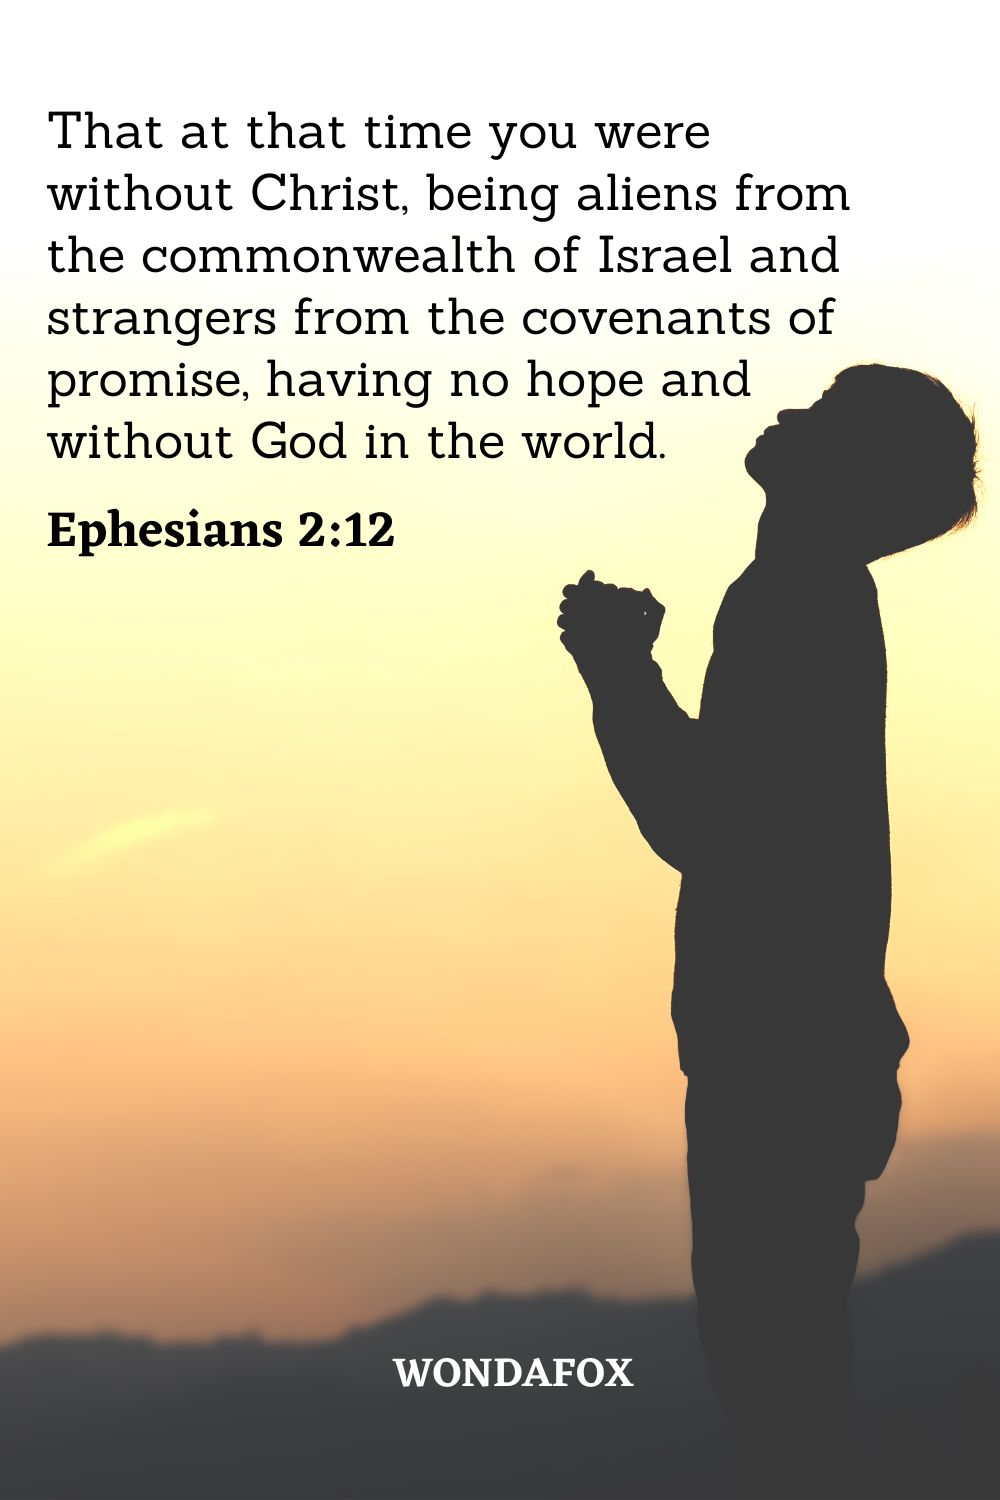 That at that time you were without Christ, being aliens from the commonwealth of Israel and strangers from the covenants of promise, having no hope and without God in the world.
Ephesians 2:12